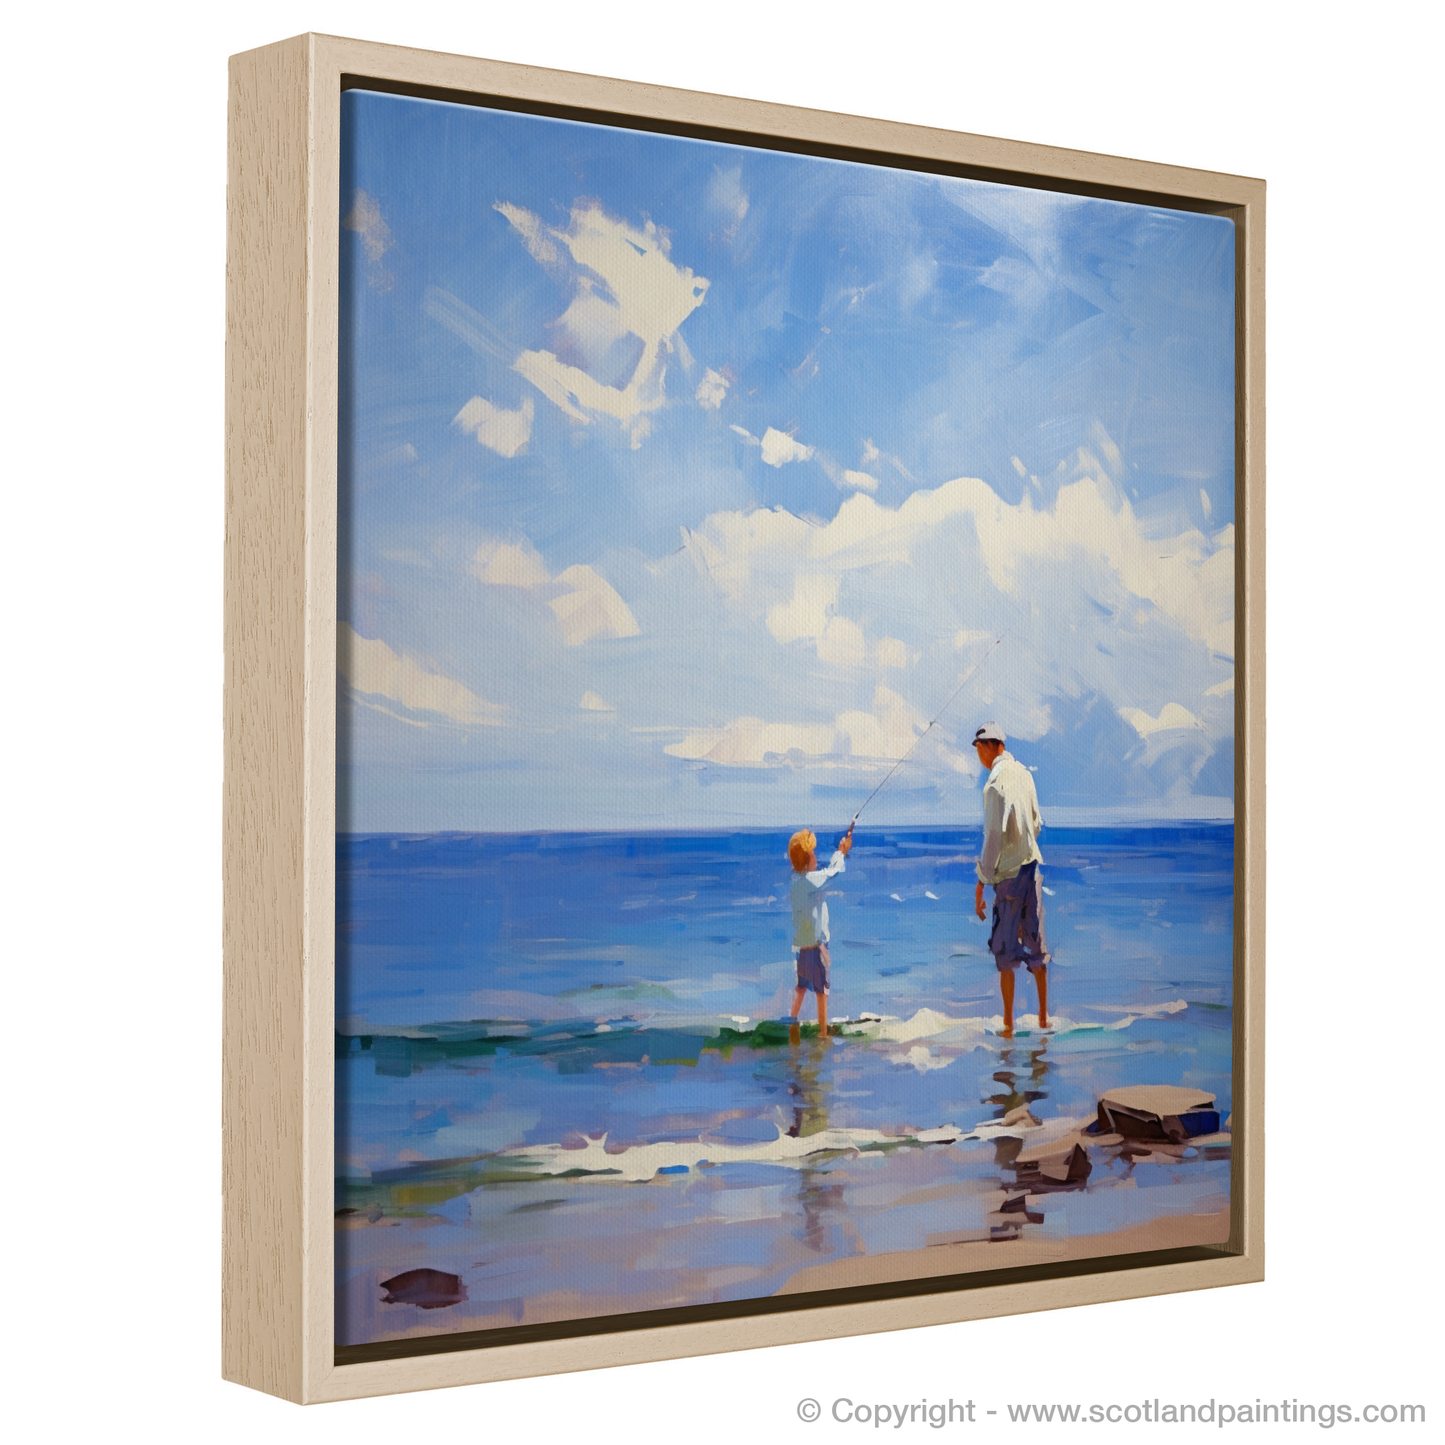 Painting and Art Print of A dad and son fishing at Rosemarkie Beach entitled "Fishing Together at Rosemarkie Beach - An Impressionist Reflection of Father-Son Bonding".